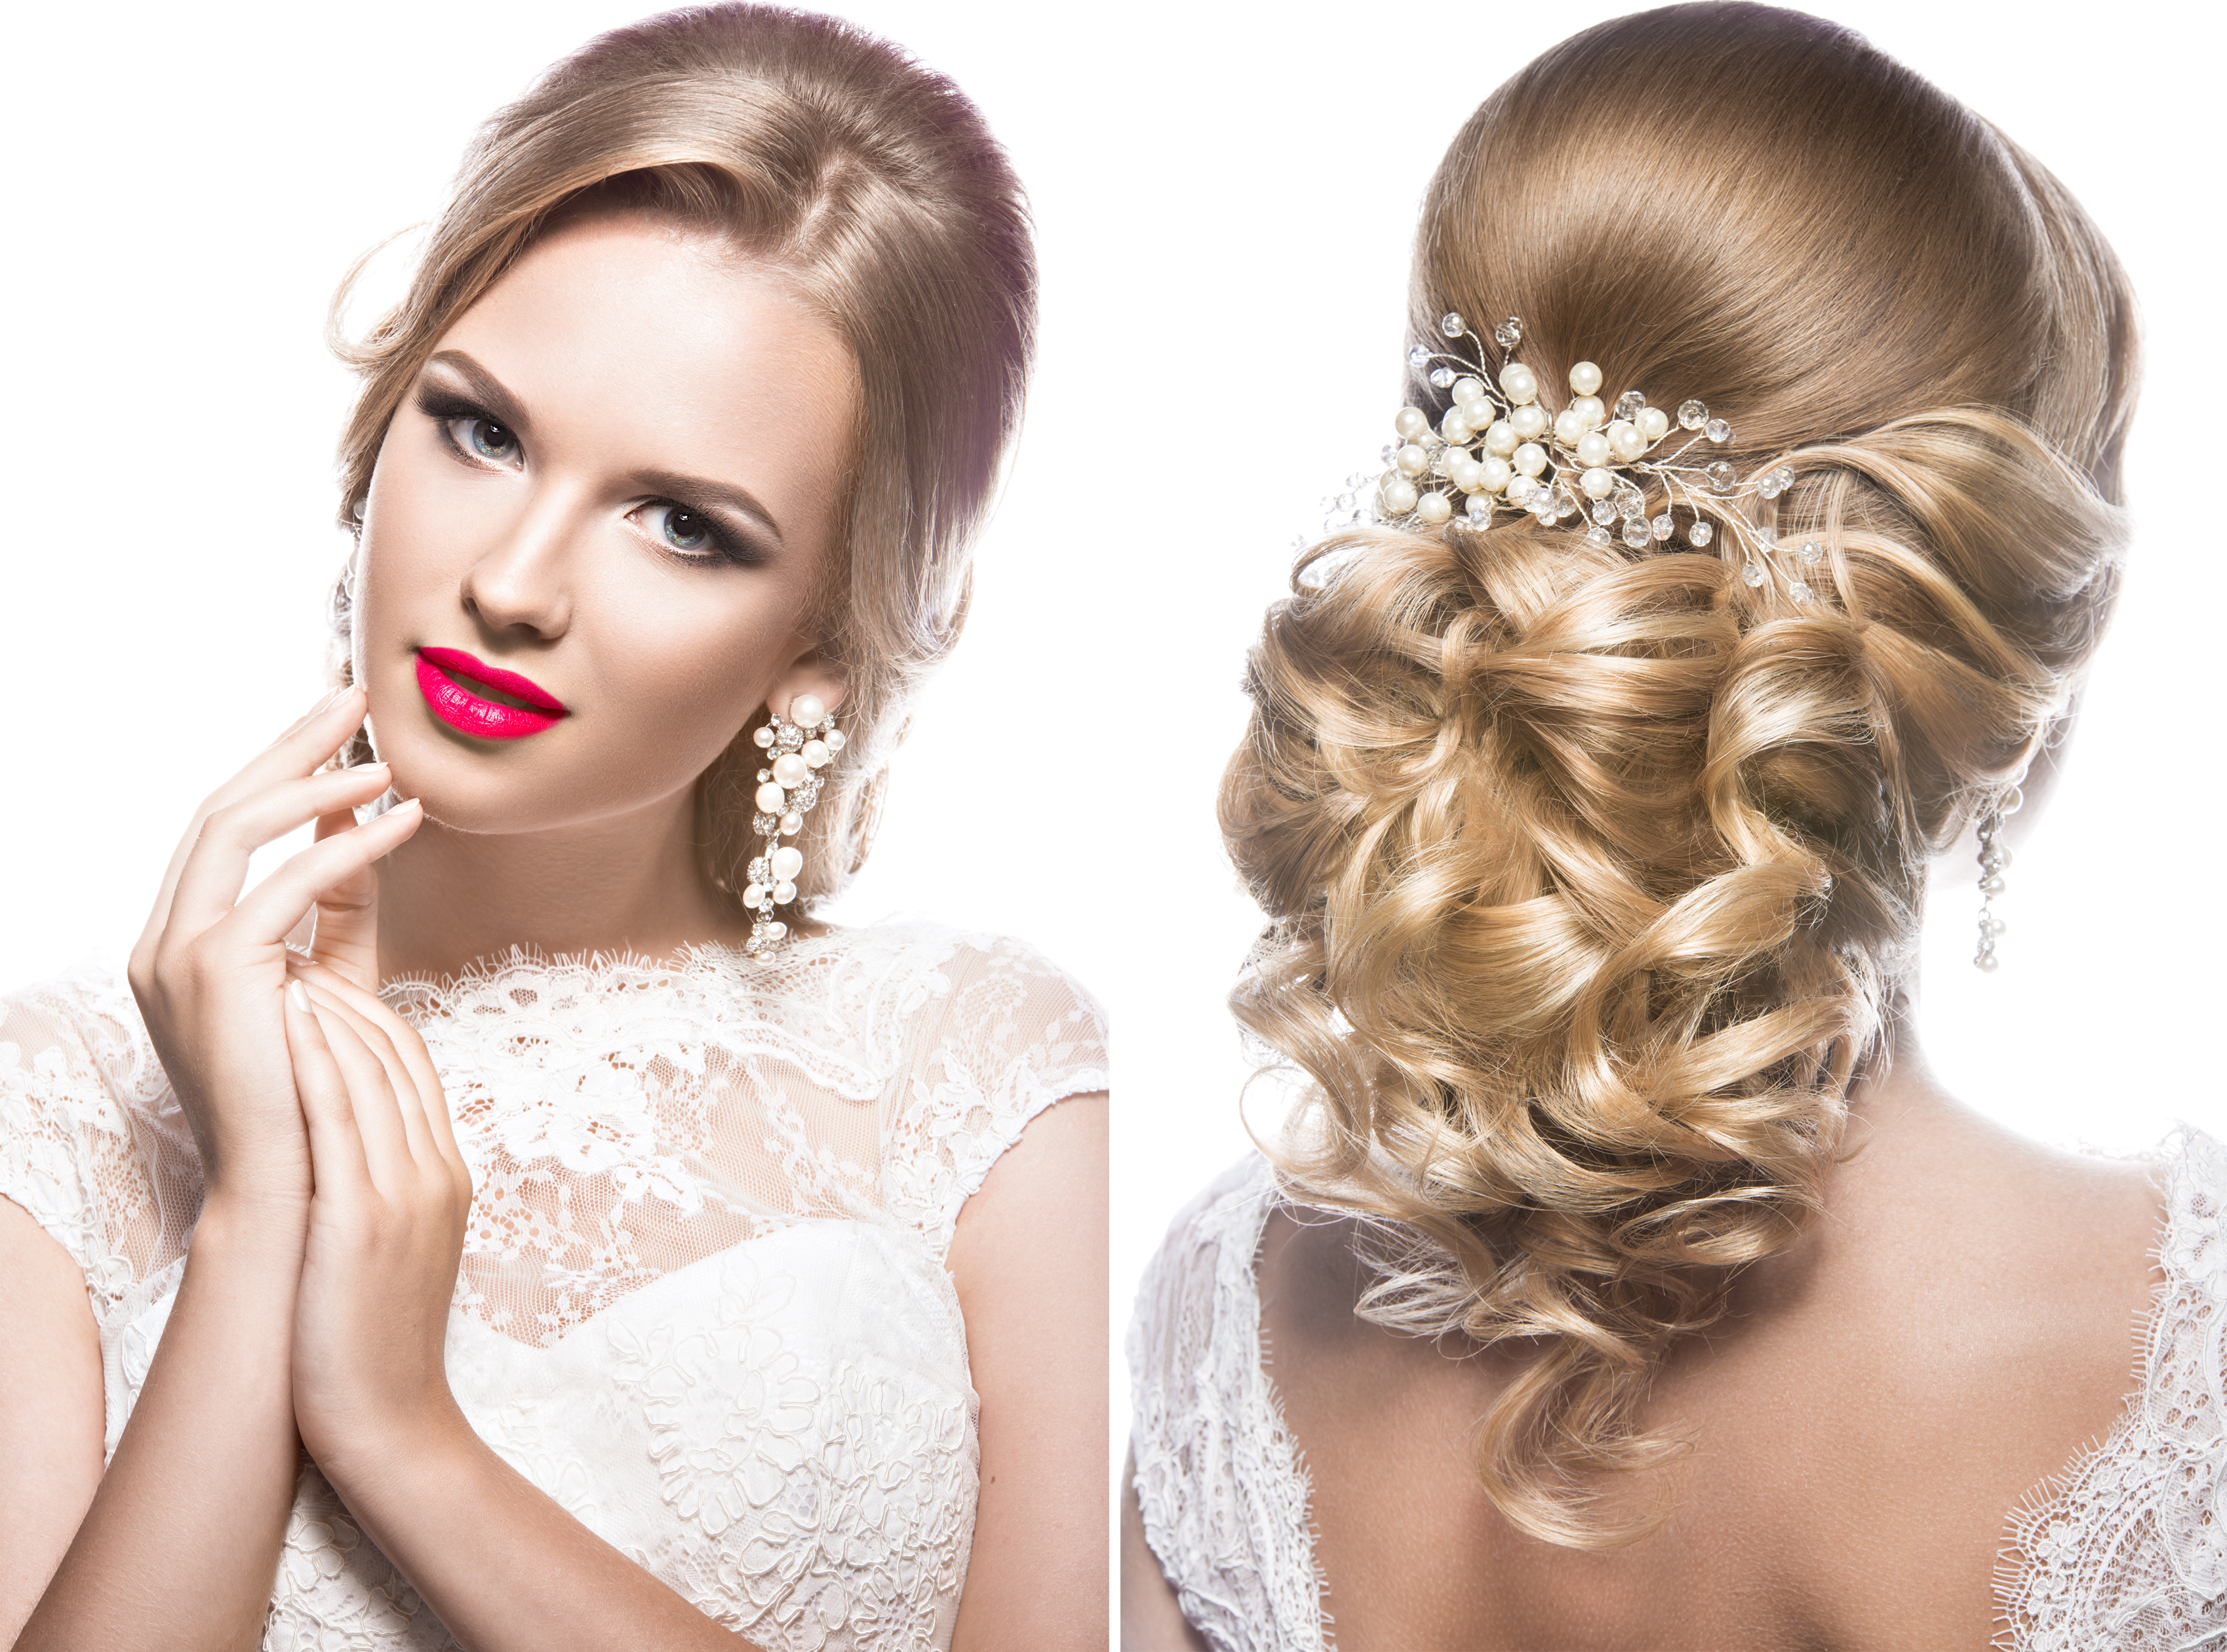 How to get Beautiful Hair on Your Wedding Day with Hair Extensions